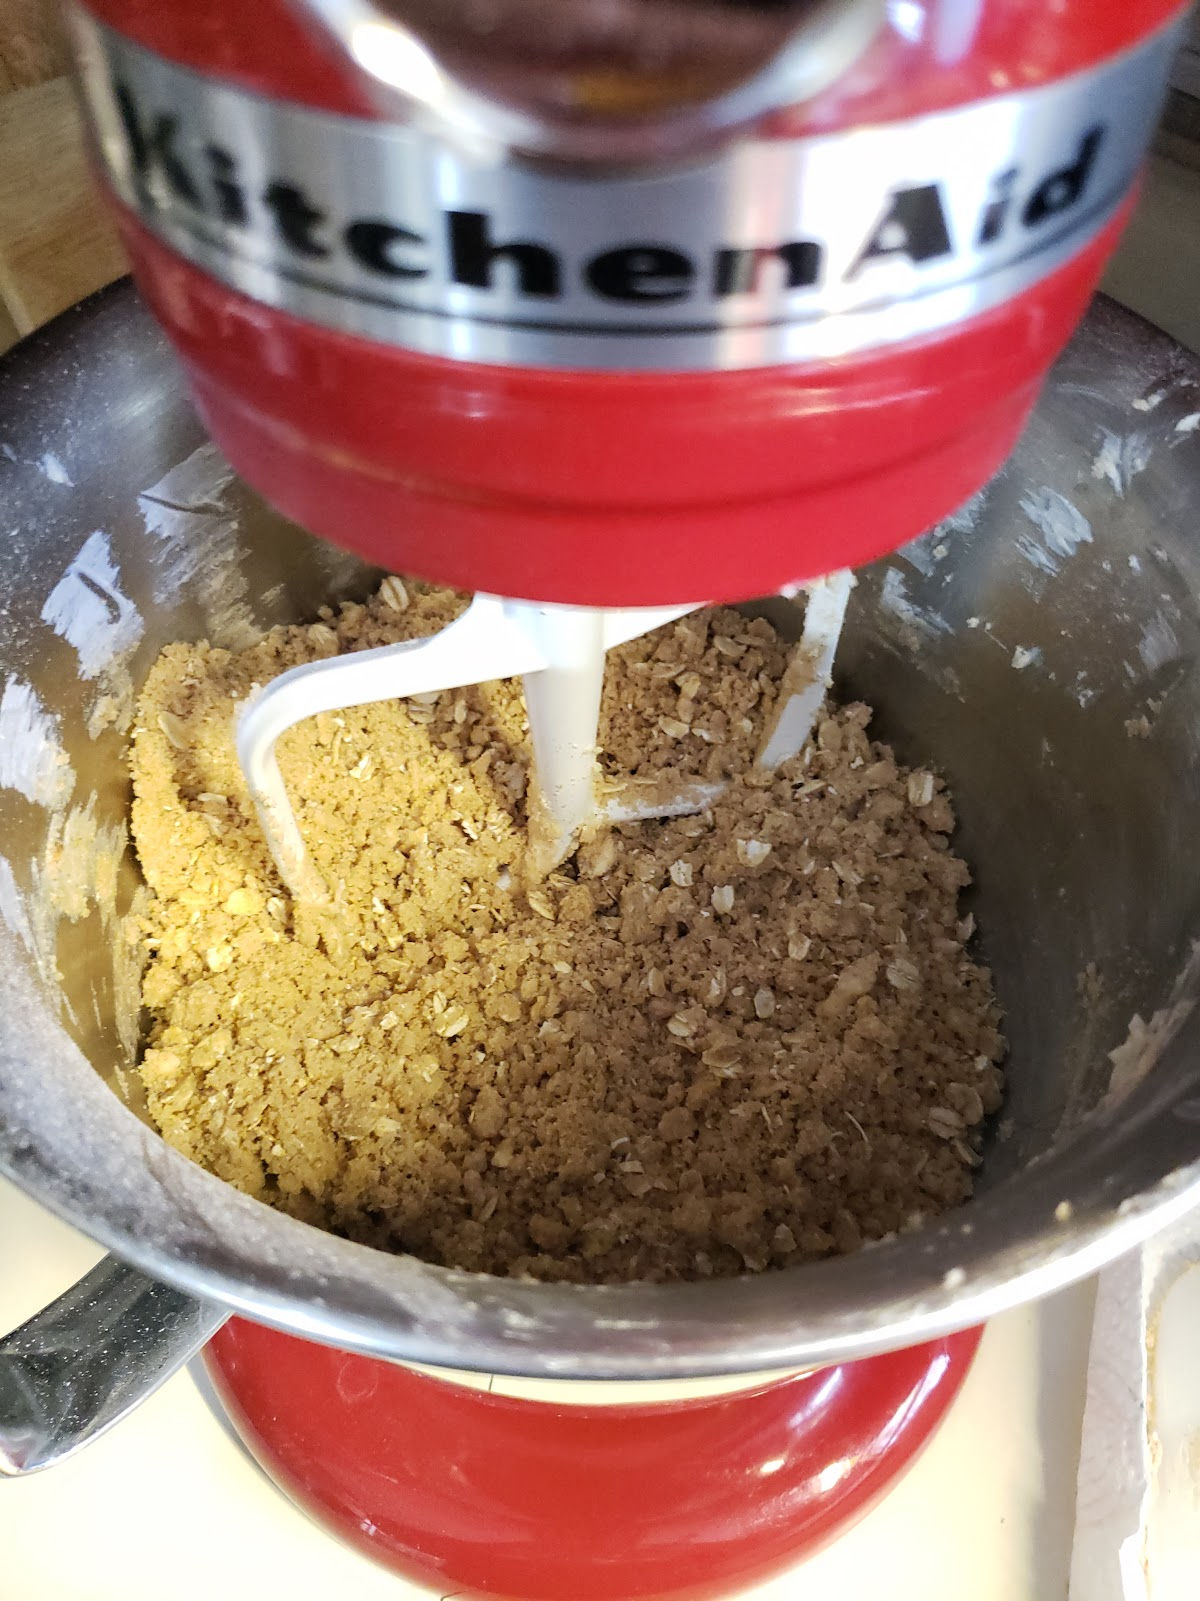 Red Kitchenaid mixer with apple crumble topping mixing.